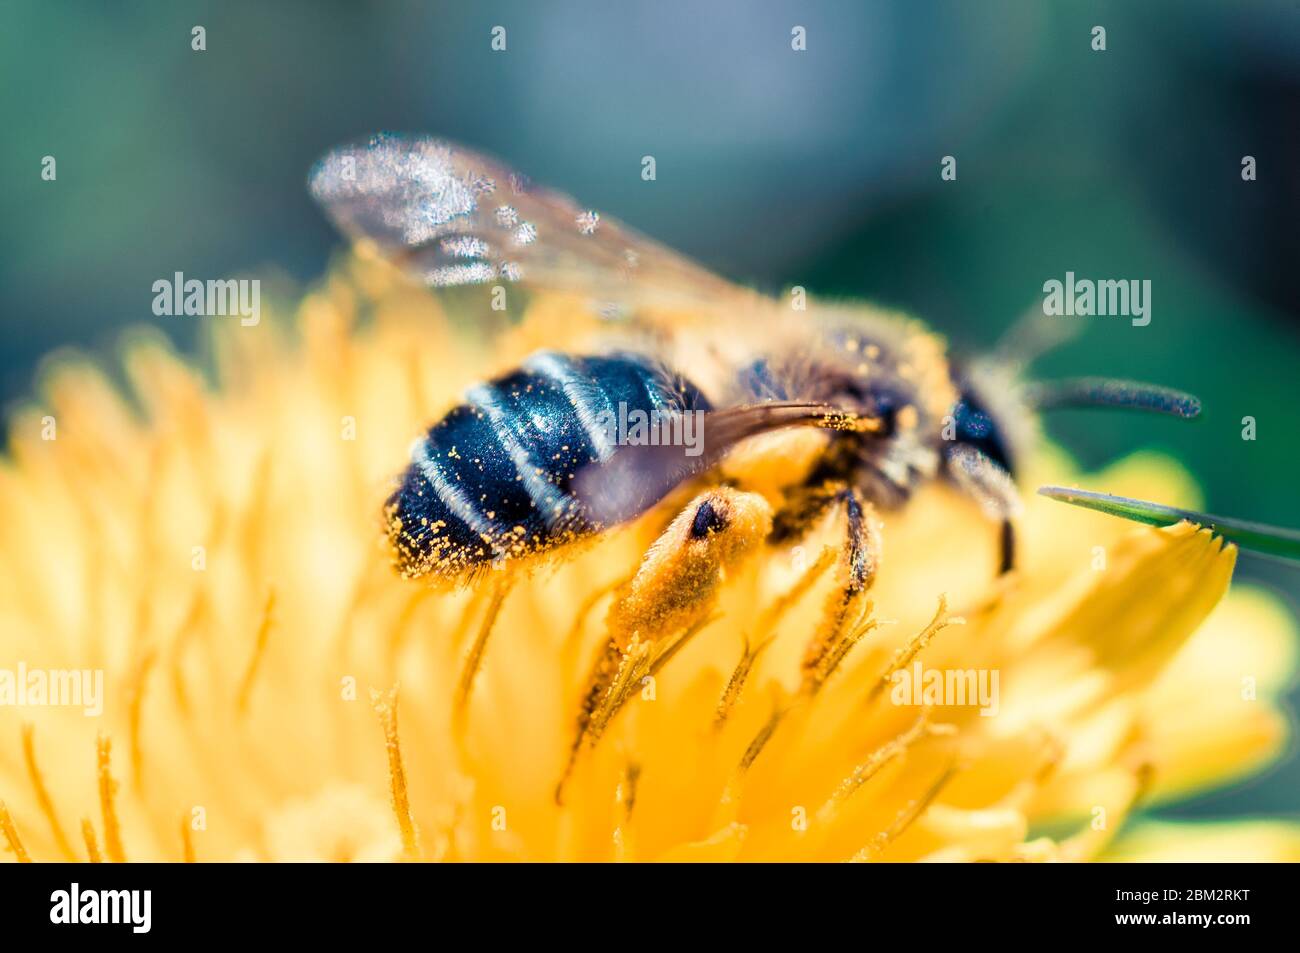 beautiful bee on a flower in yellow is very close Stock Photo